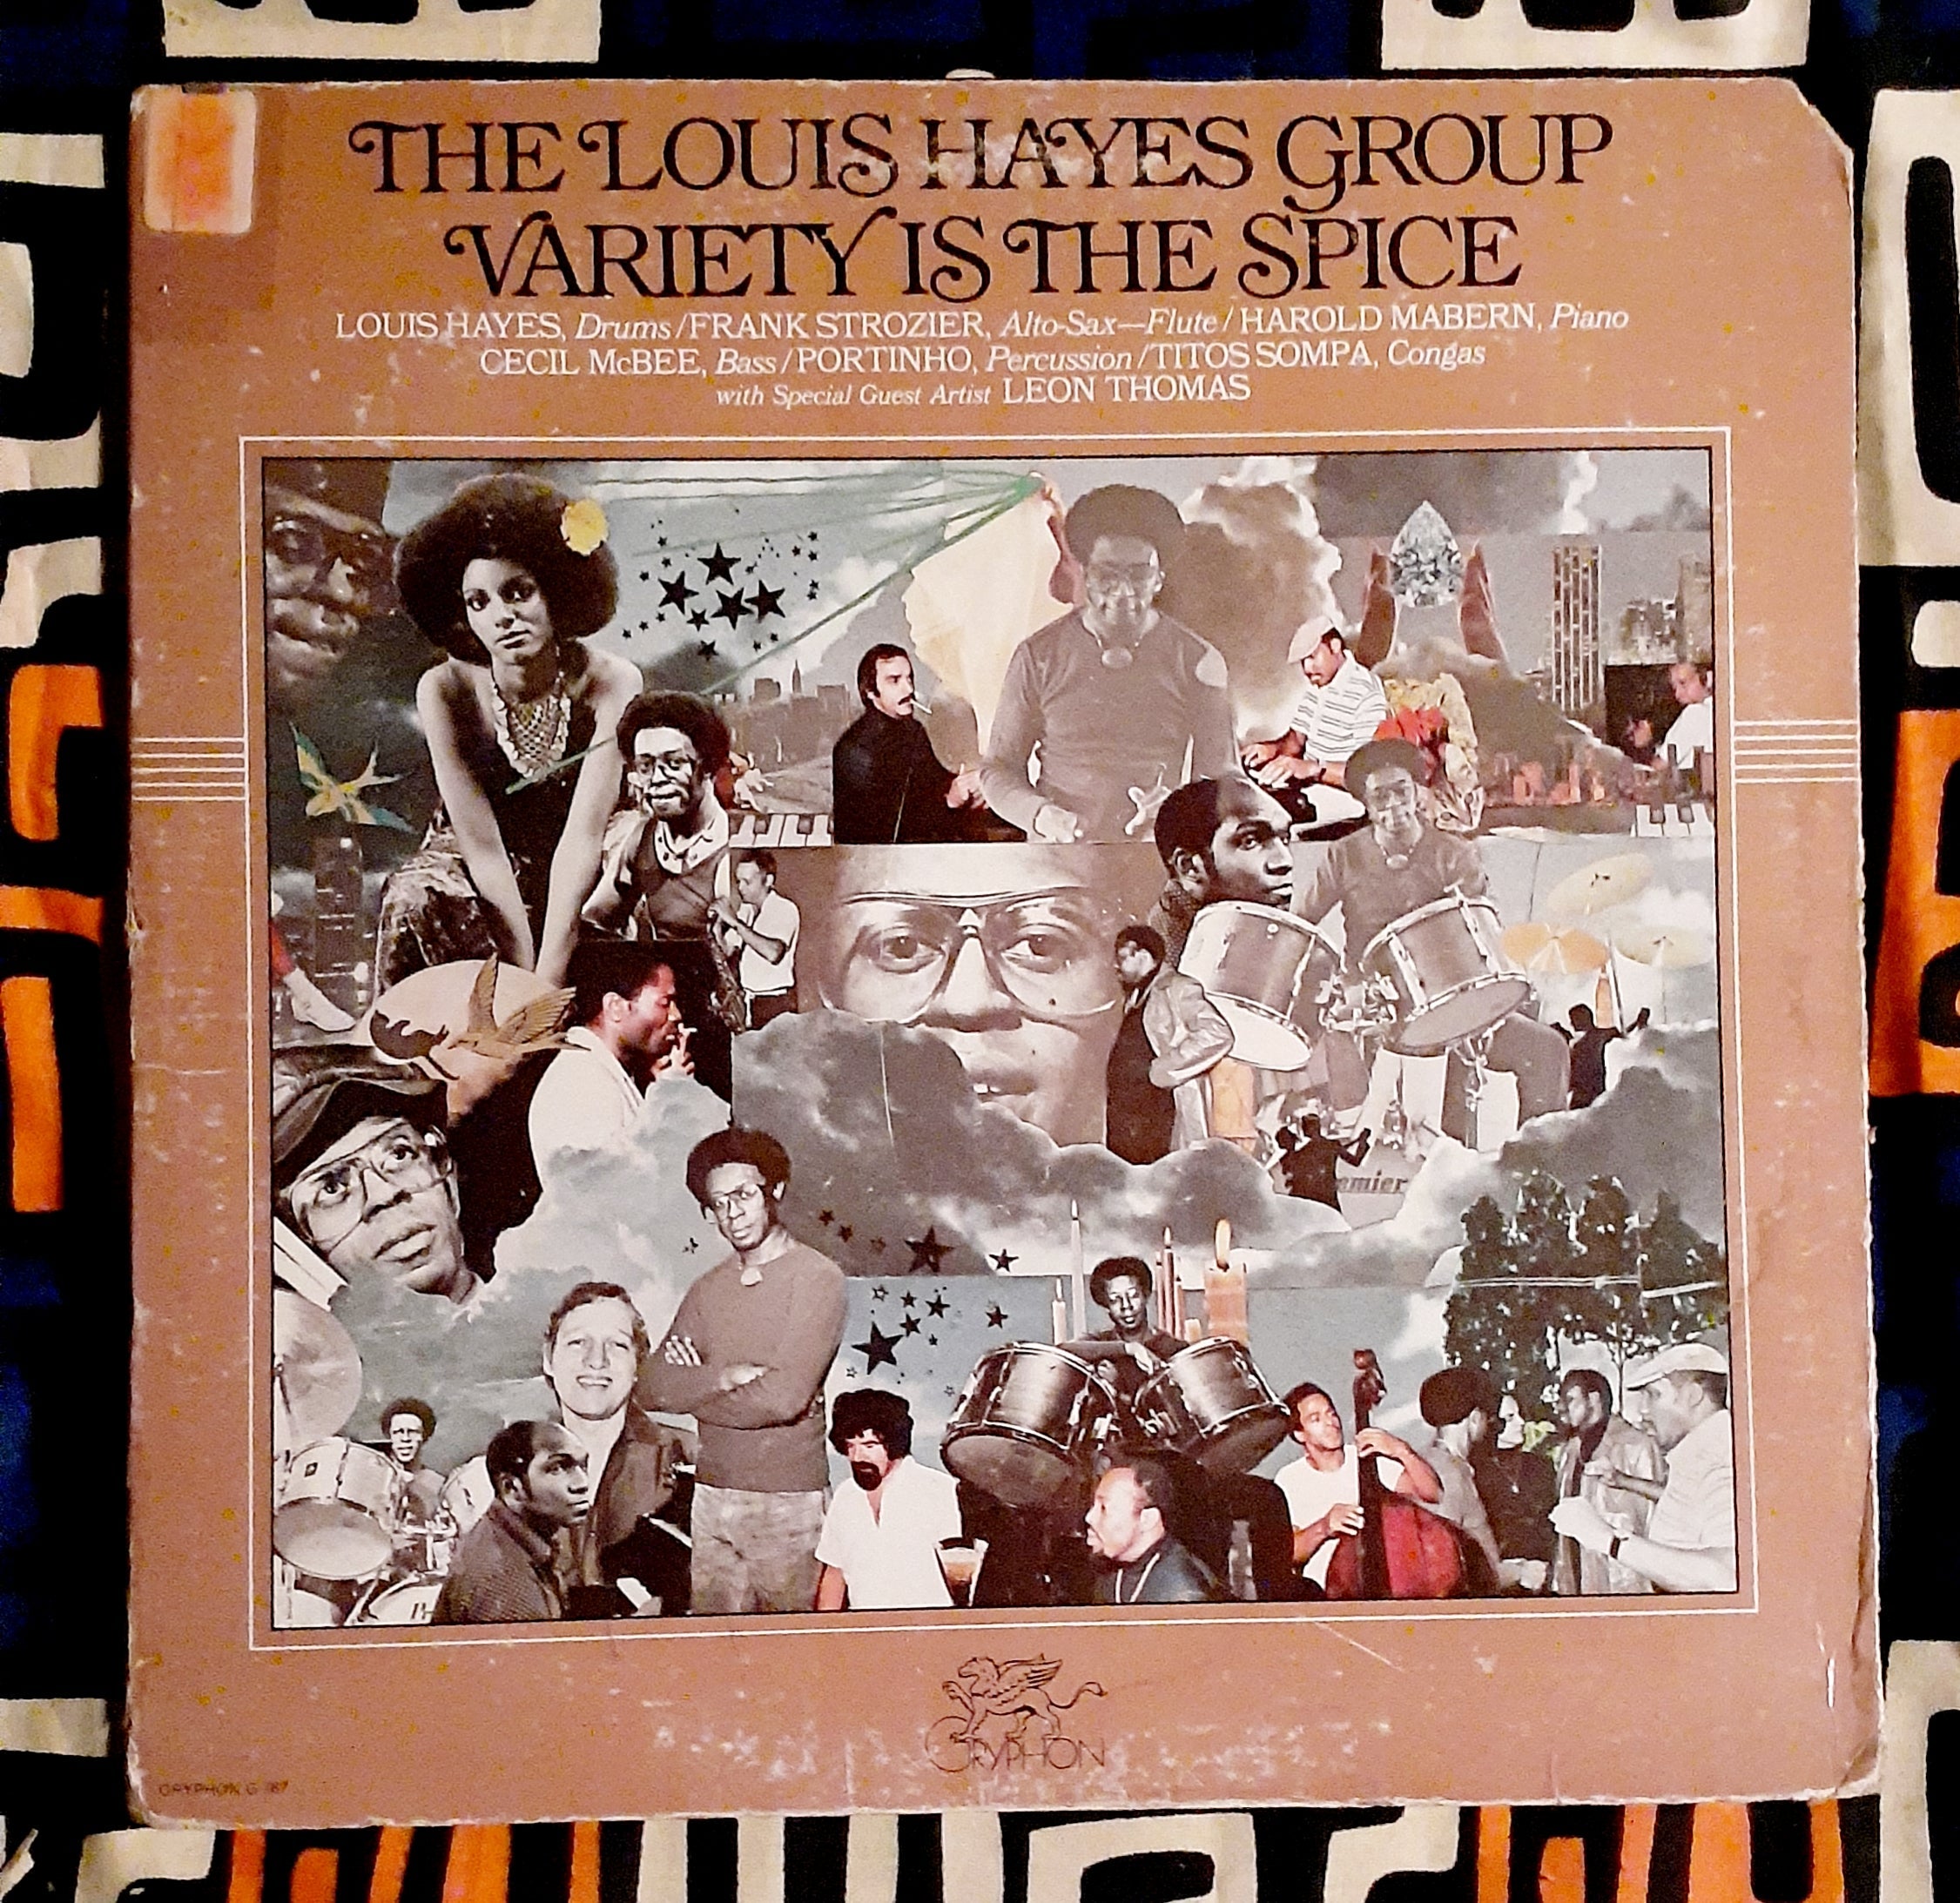 Variety is the Spice - The Louis Hayes Group 33 RPM Lp 1979